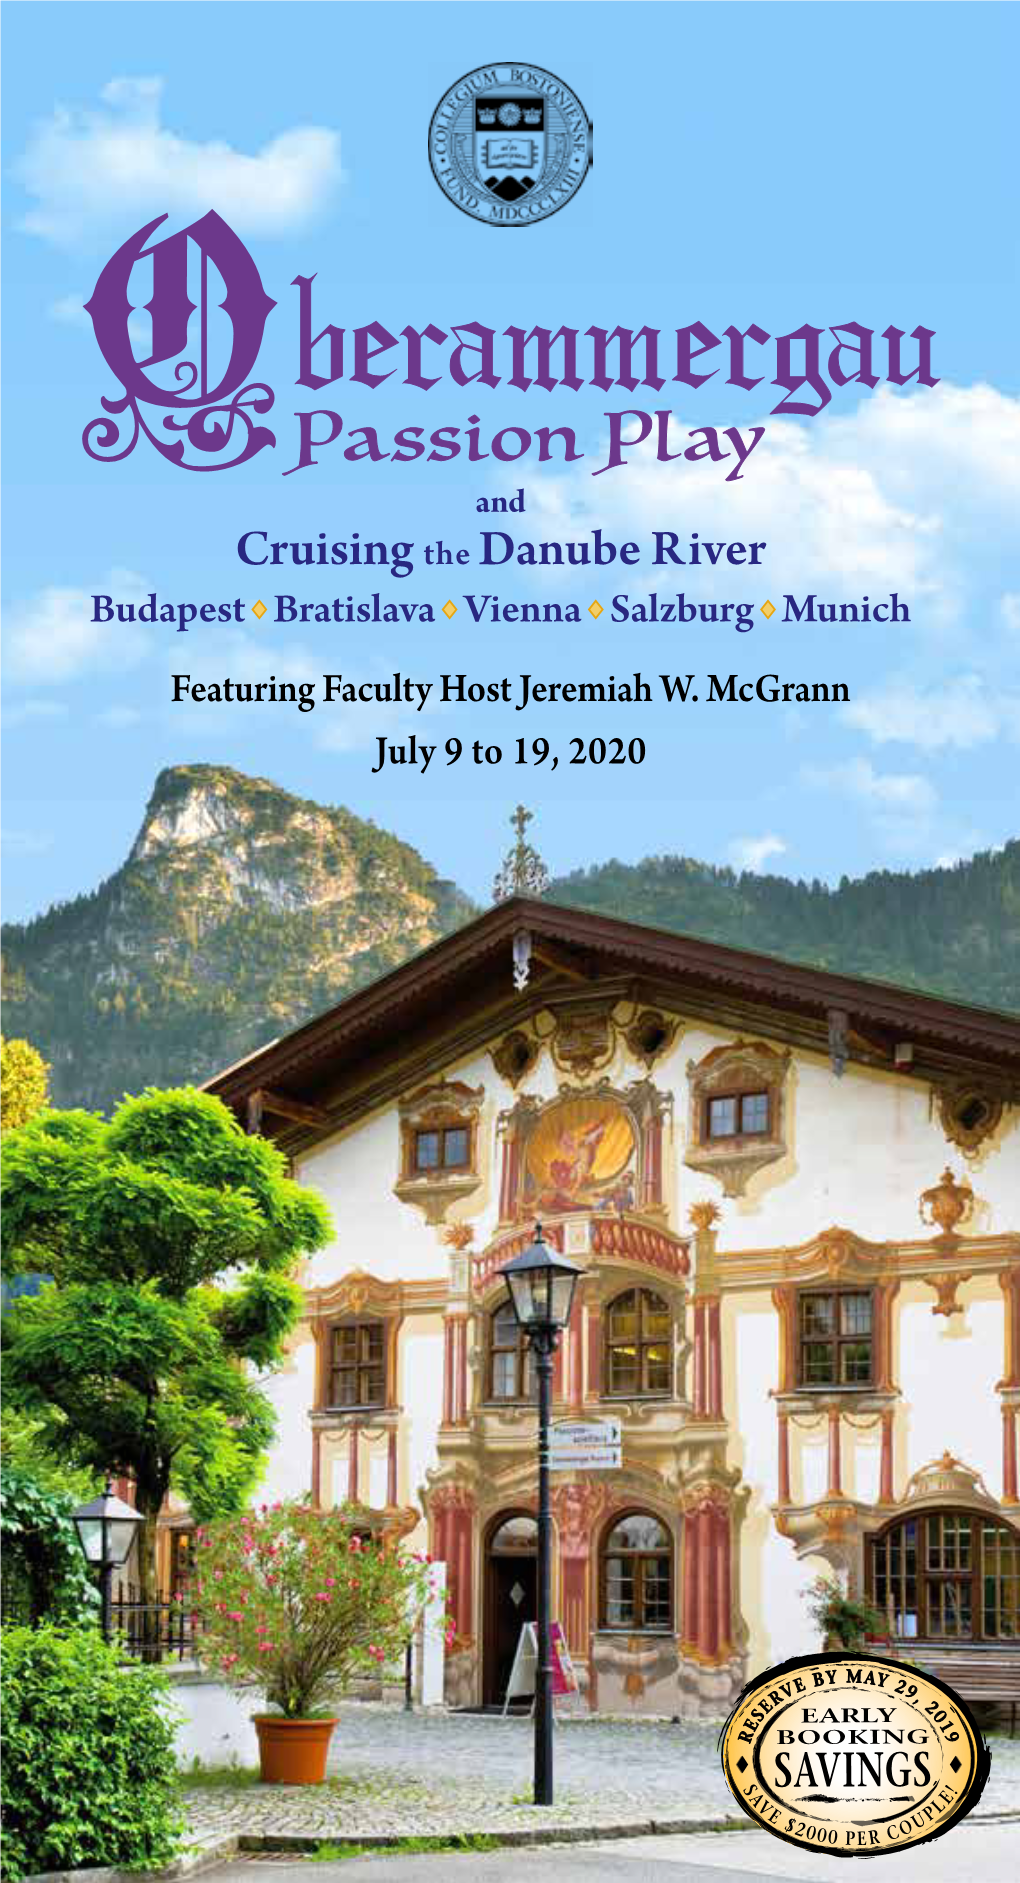 Oberammergau, Where We Will Experience the Profound Passion Play